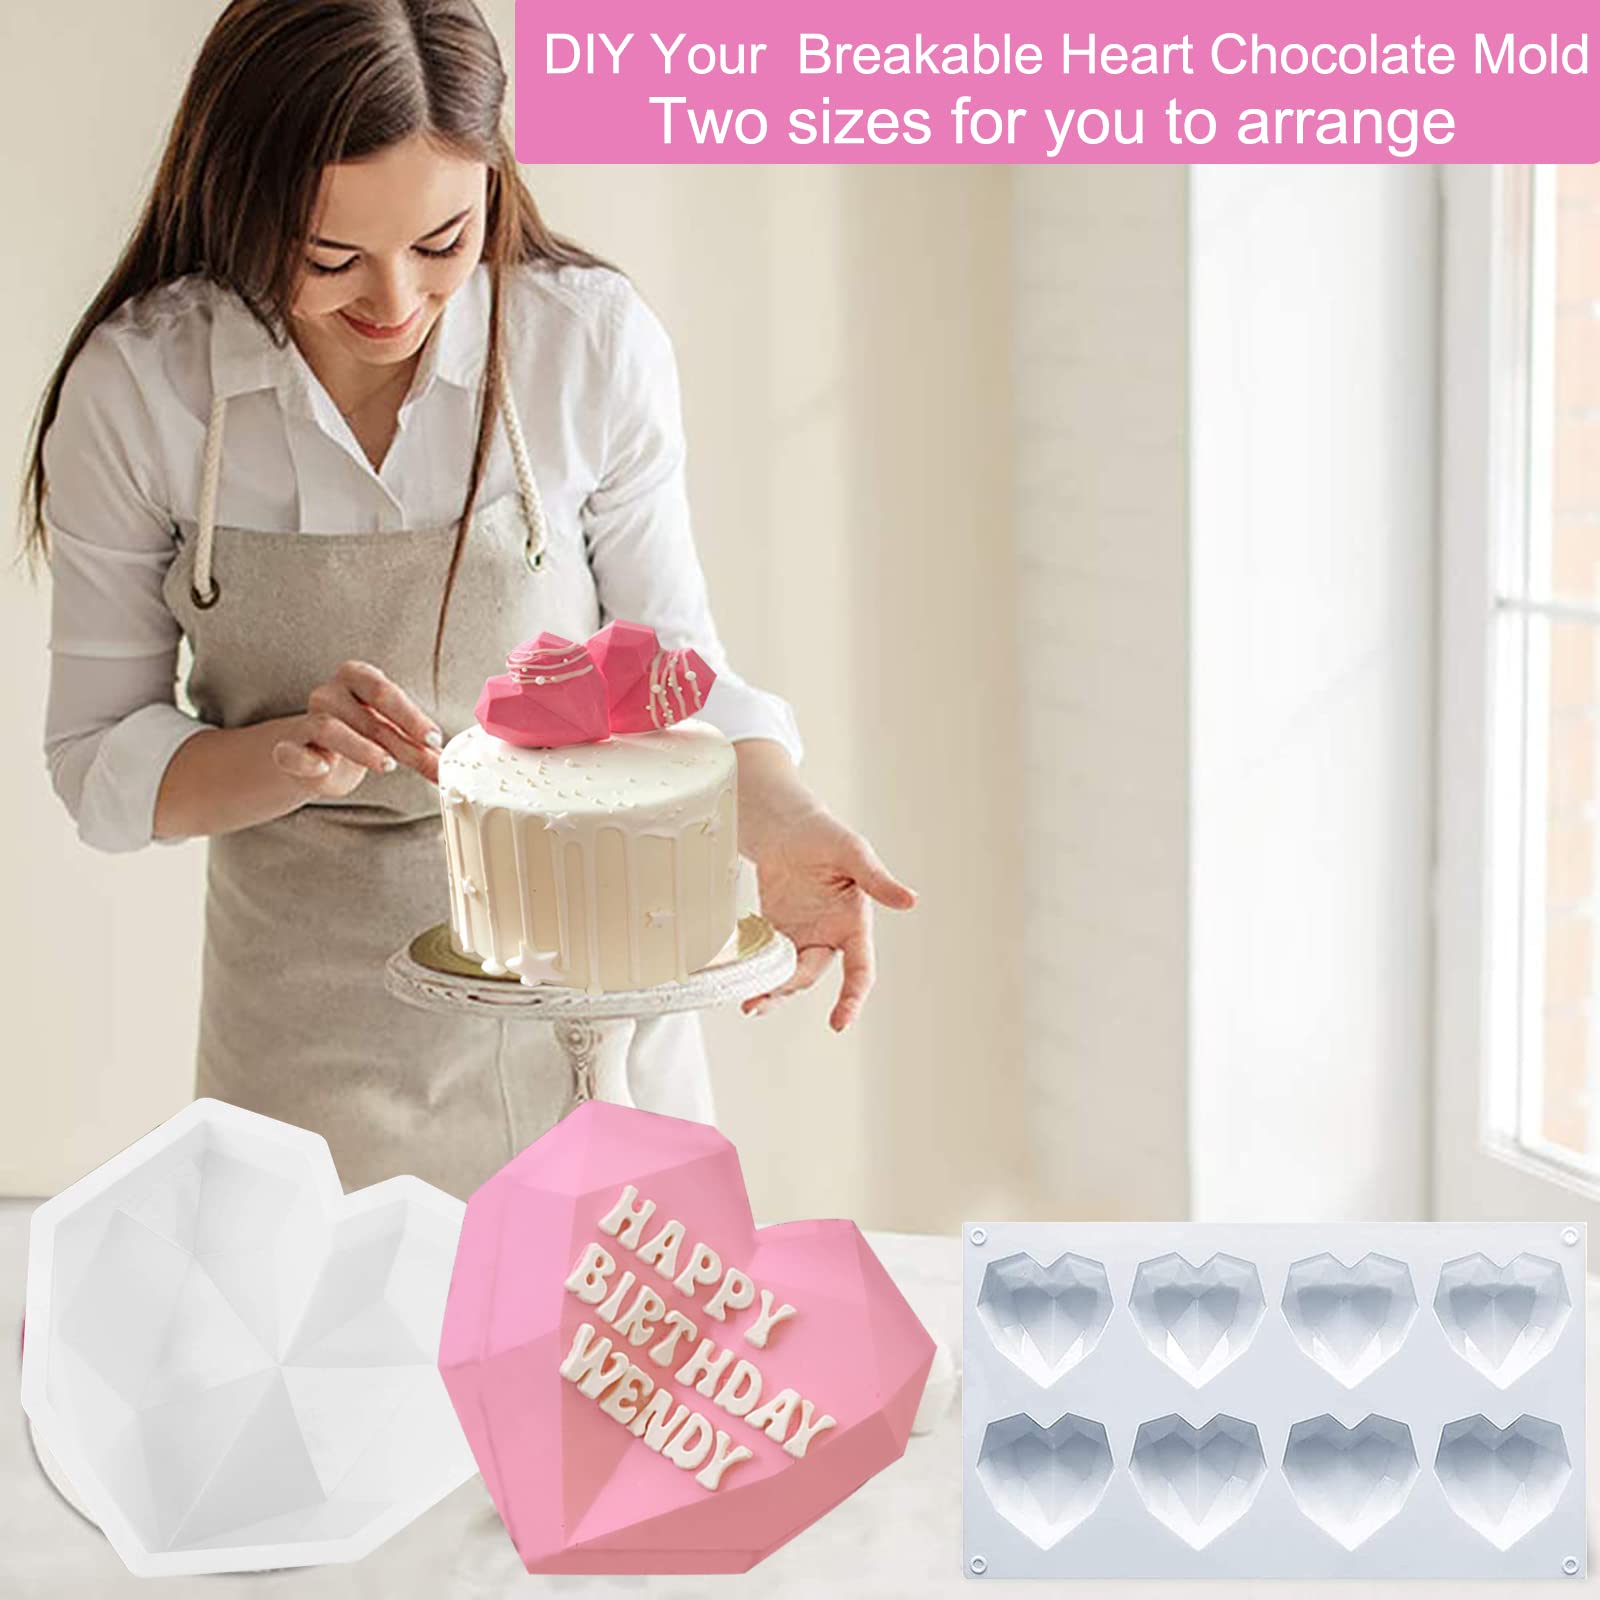 Breakable Heart Molds for chocolate, Large Chocolate Heart Silicone Molds with Hammers,Brush and Number Letter Silicone Molds,Diamond Heart Shaped Molds for Valentines Day Chocolate Candy Making